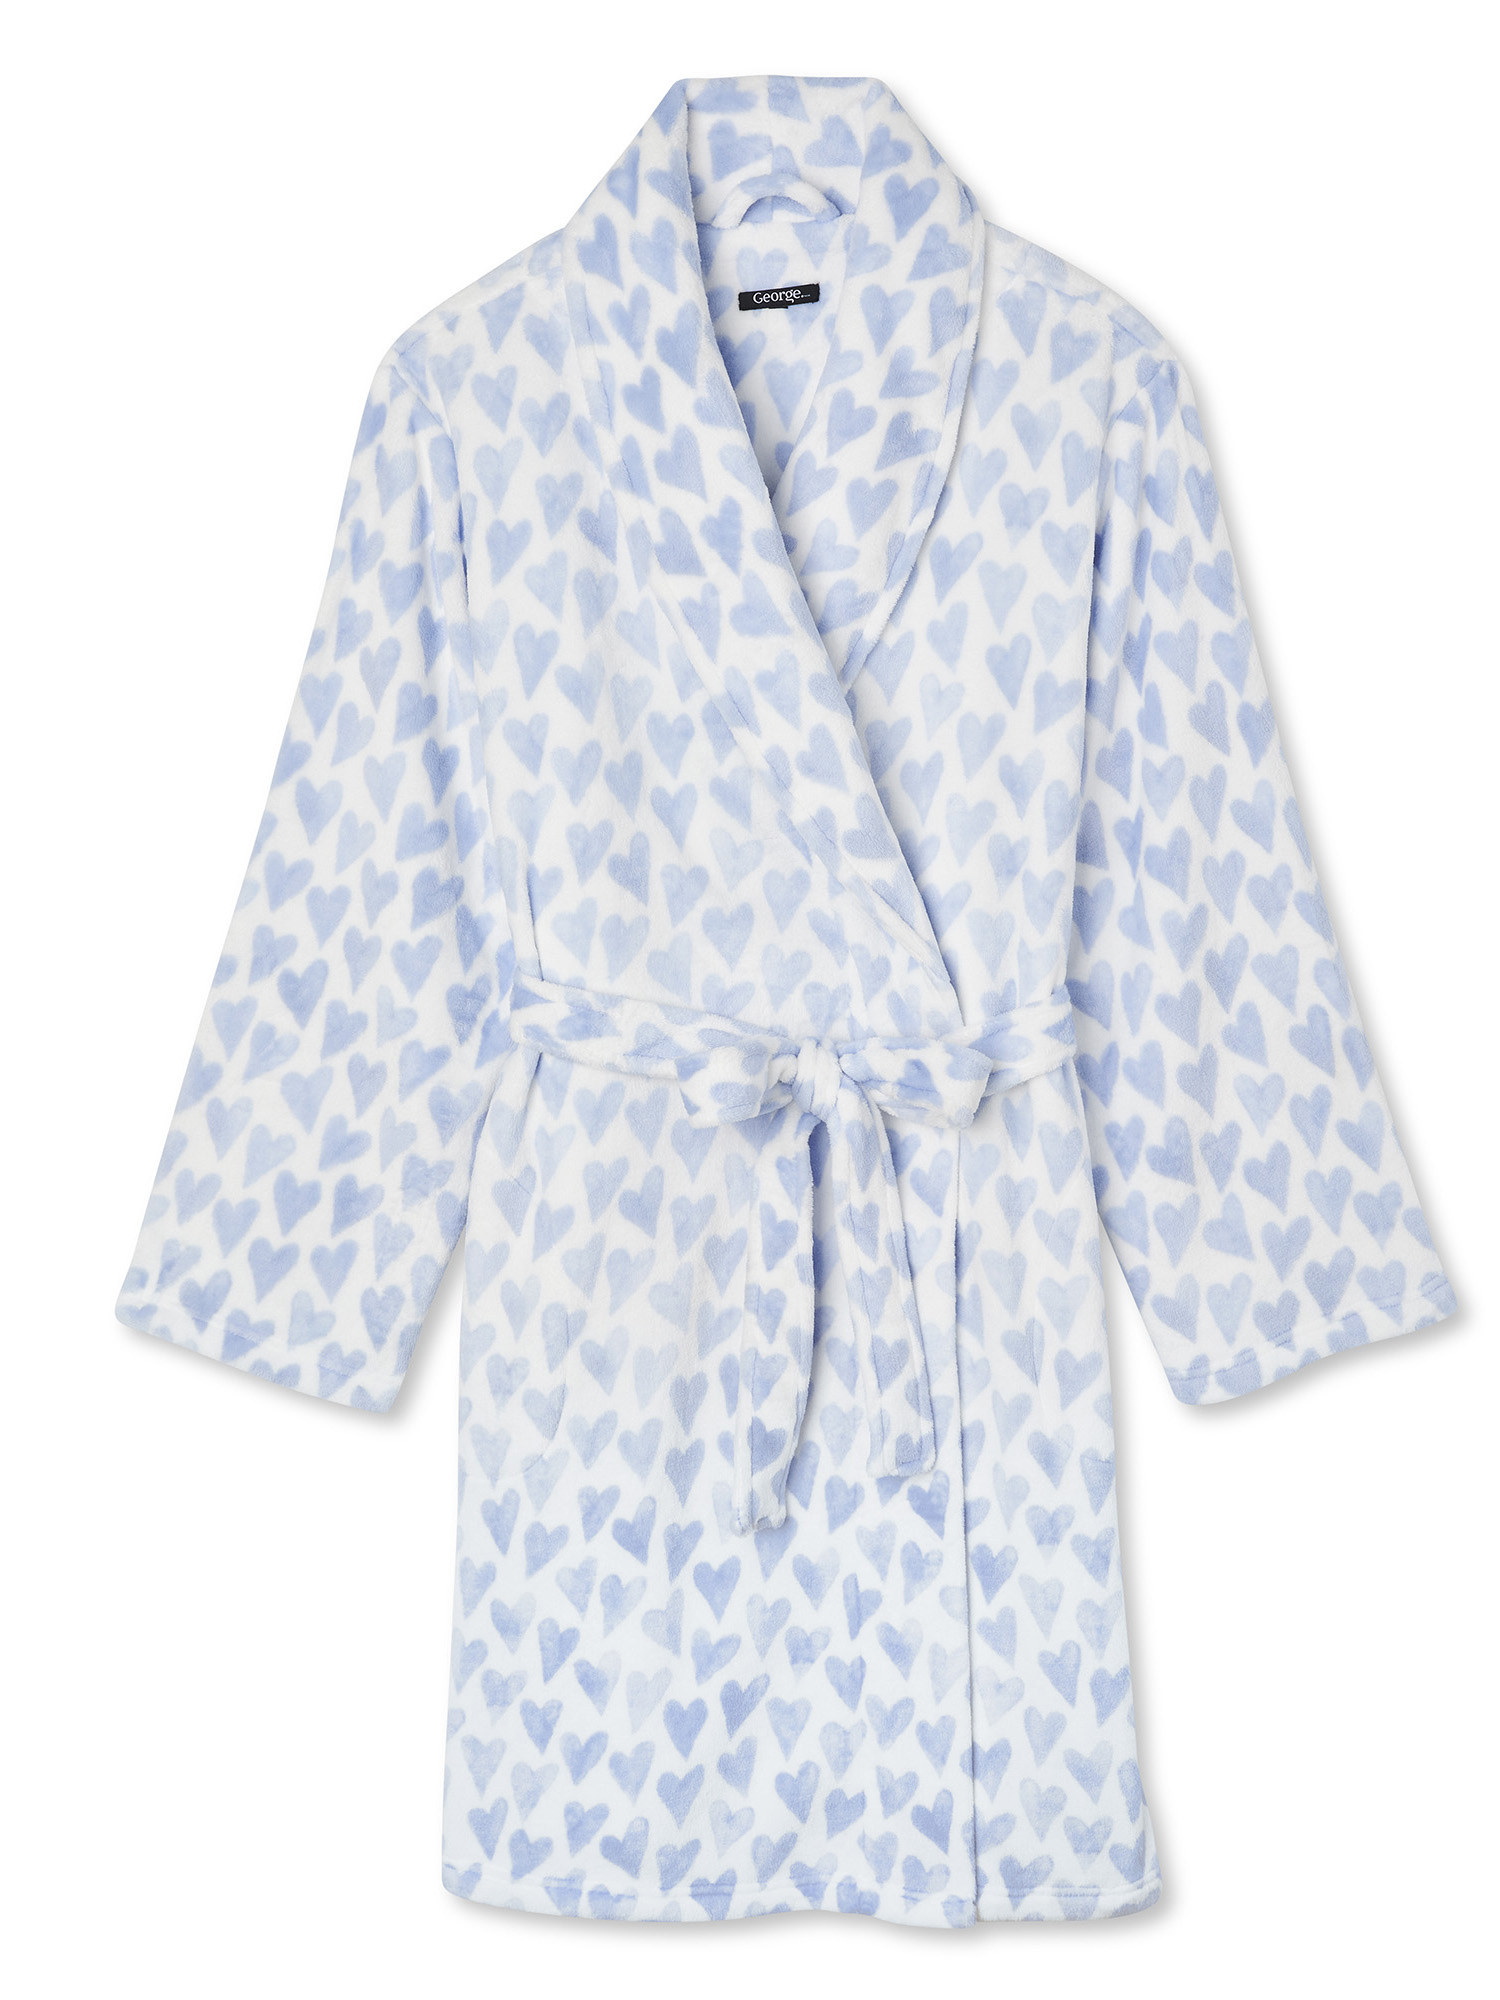 GEORGE Hearts Afternoon Polyester Robe (Women's or Women's Plus) 1 Pack - image 2 of 7